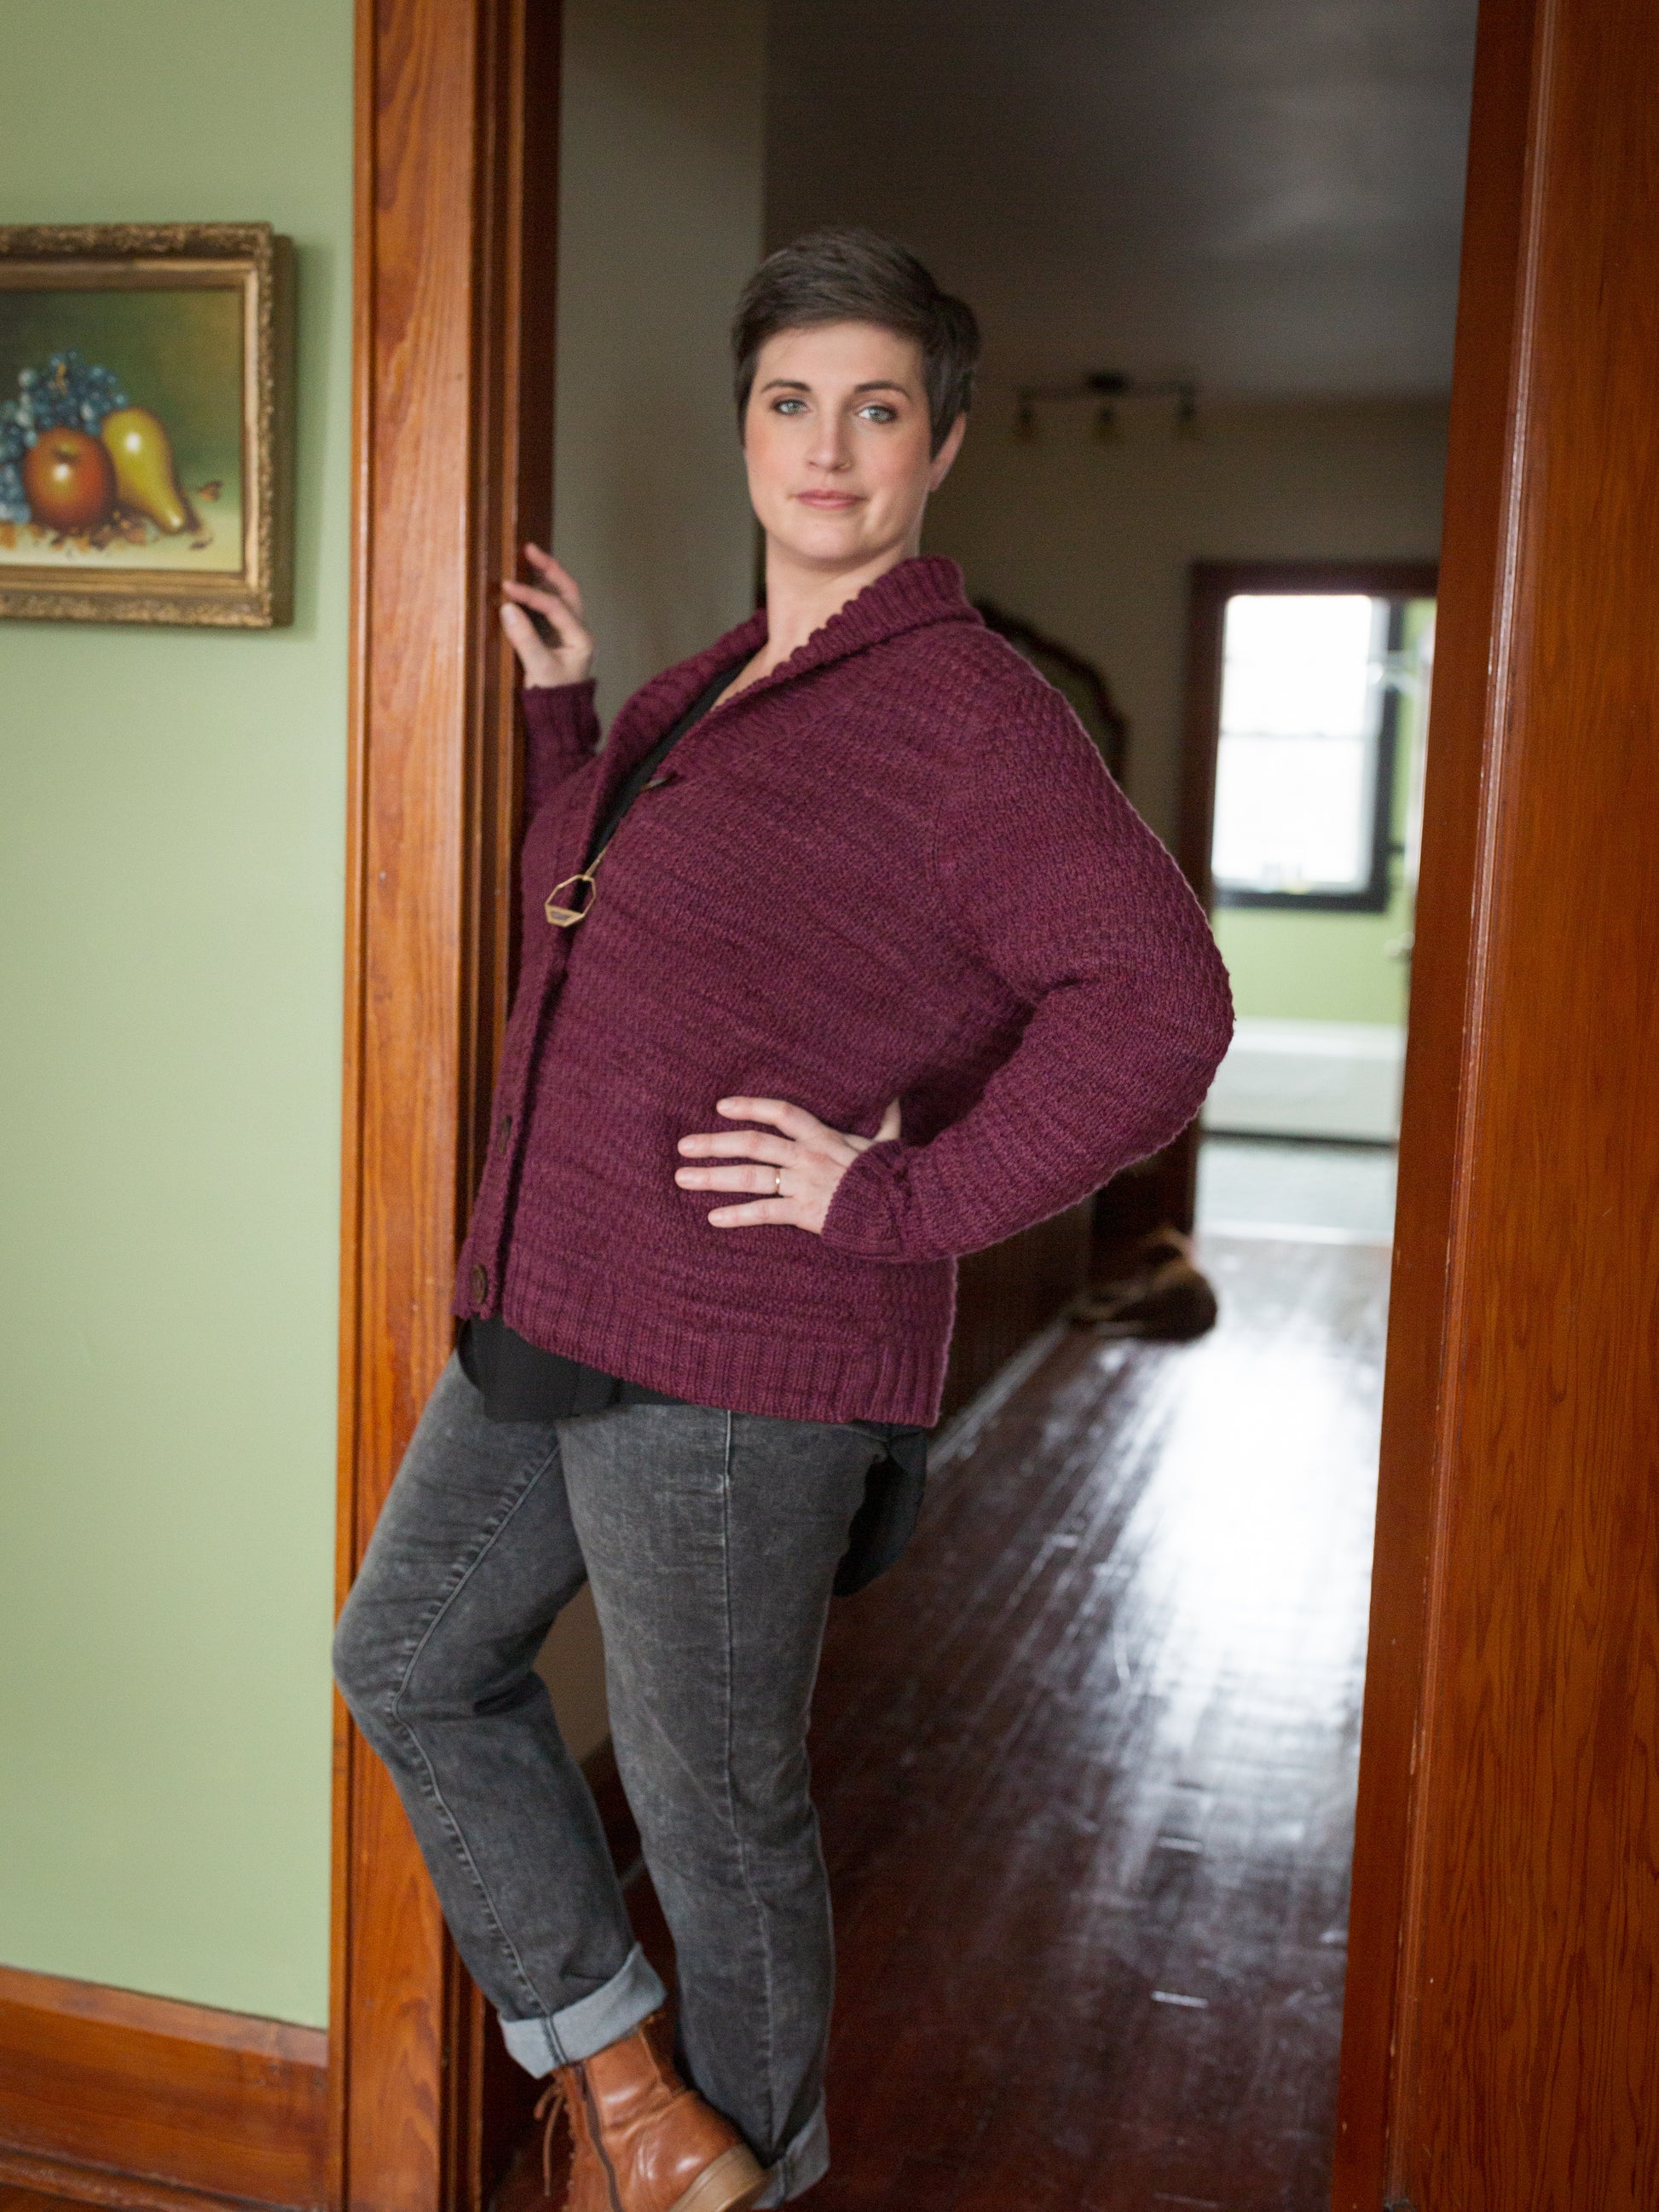 Jen stands in the doorway, at an angle to the camera. She has one hand on her hip, showing off the masculine structure of the hand knit, burgundy cardigan that she wears with brown boots and grey jeans.